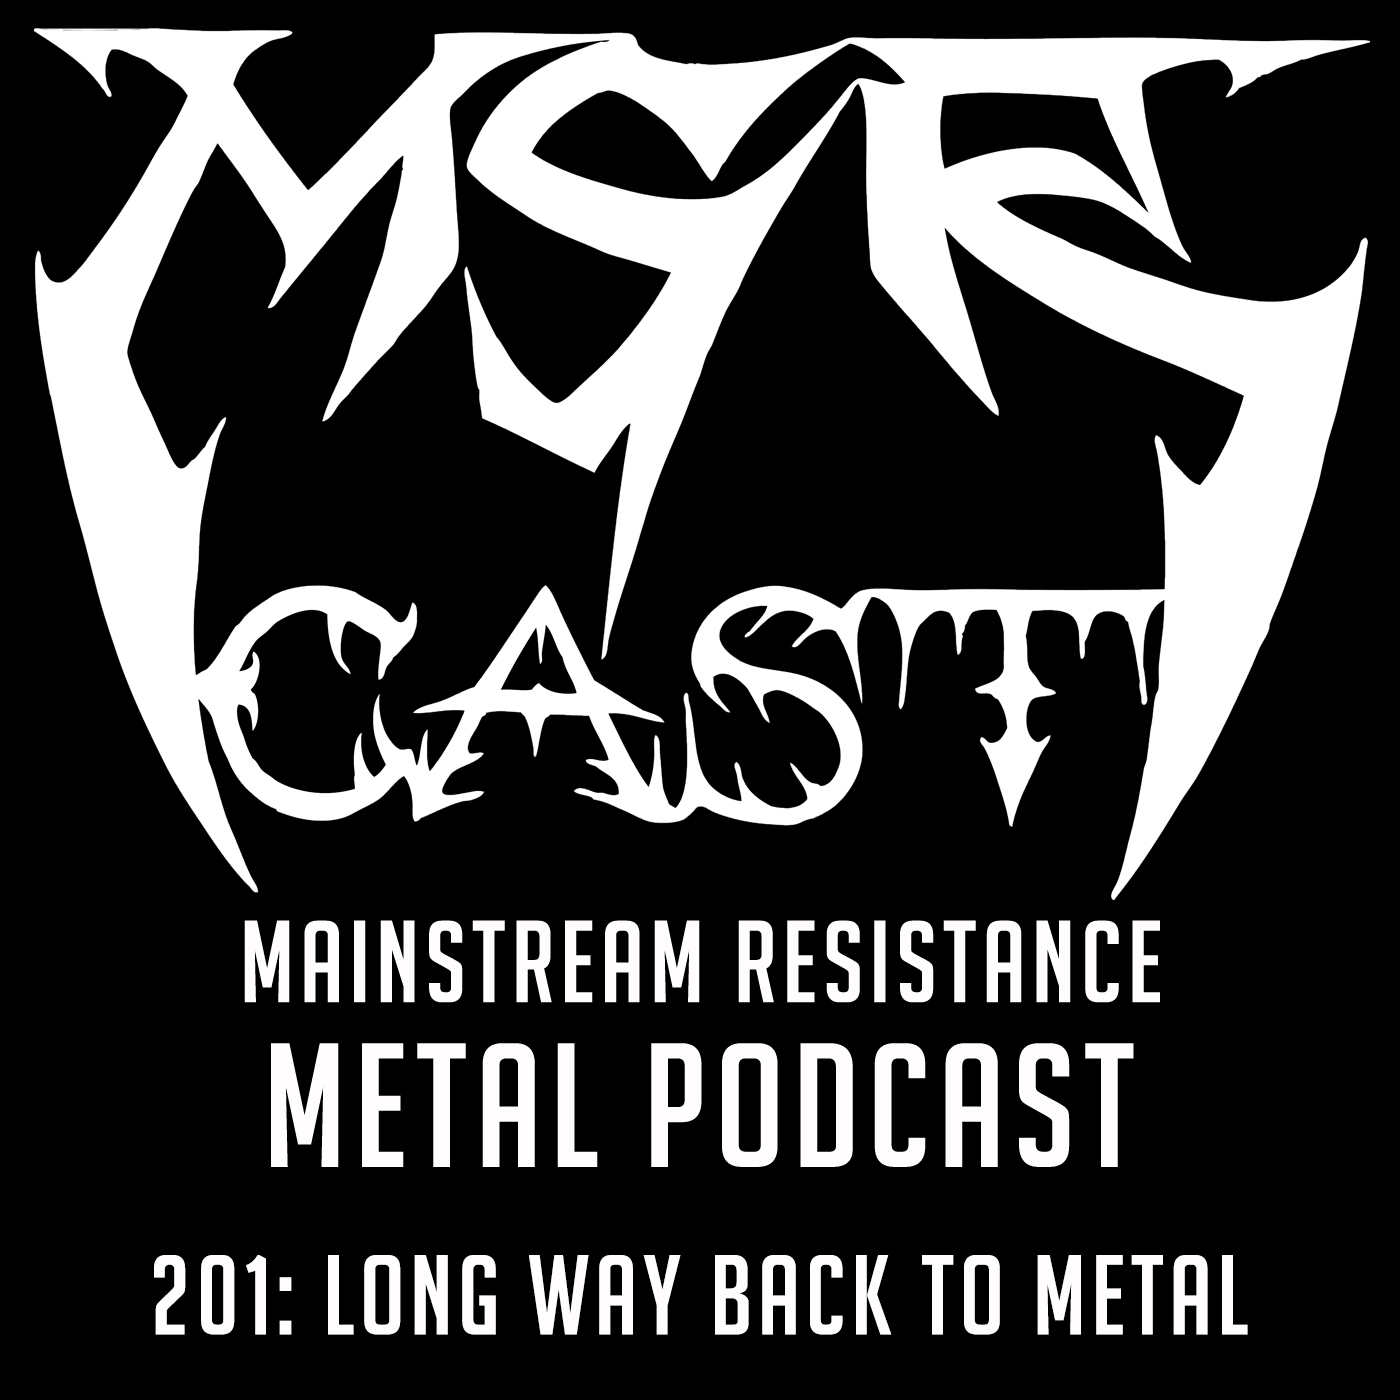 MSRcast 201: Long Way Back To Metal